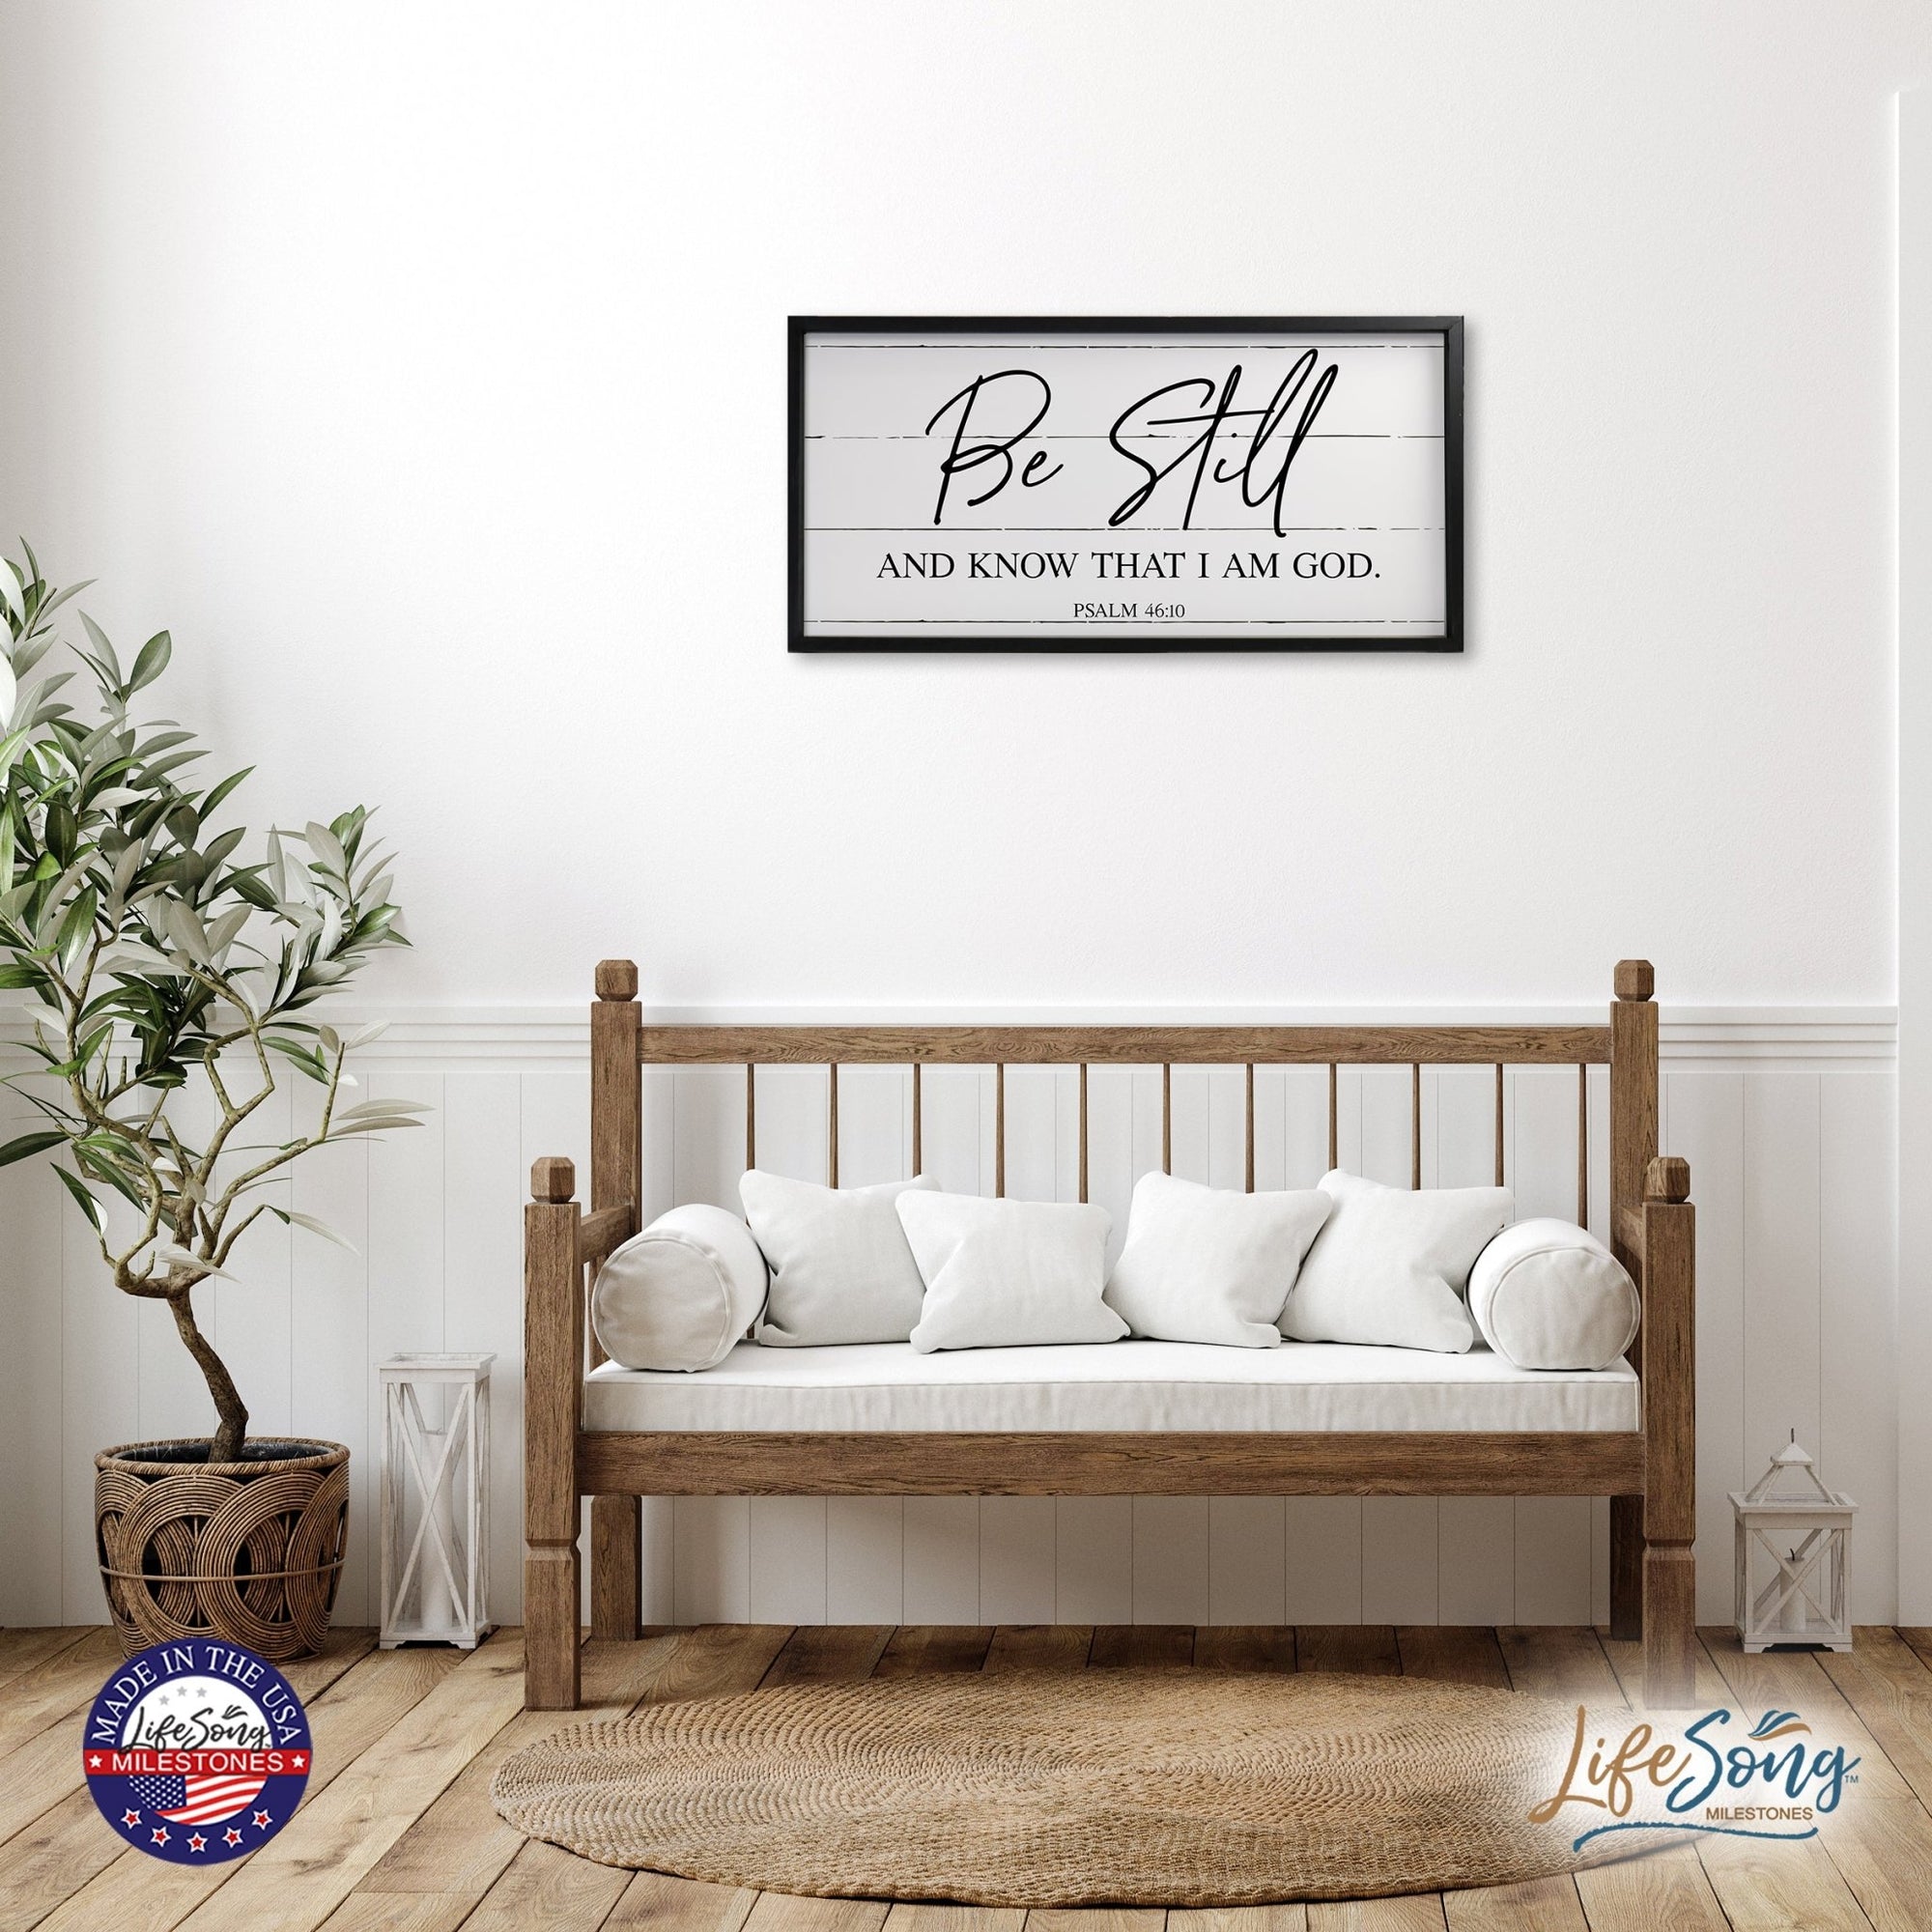 Large Family Wall Décor Quote Sign For Home Decoration 18 x 36 - Be Still And Know - LifeSong Milestones